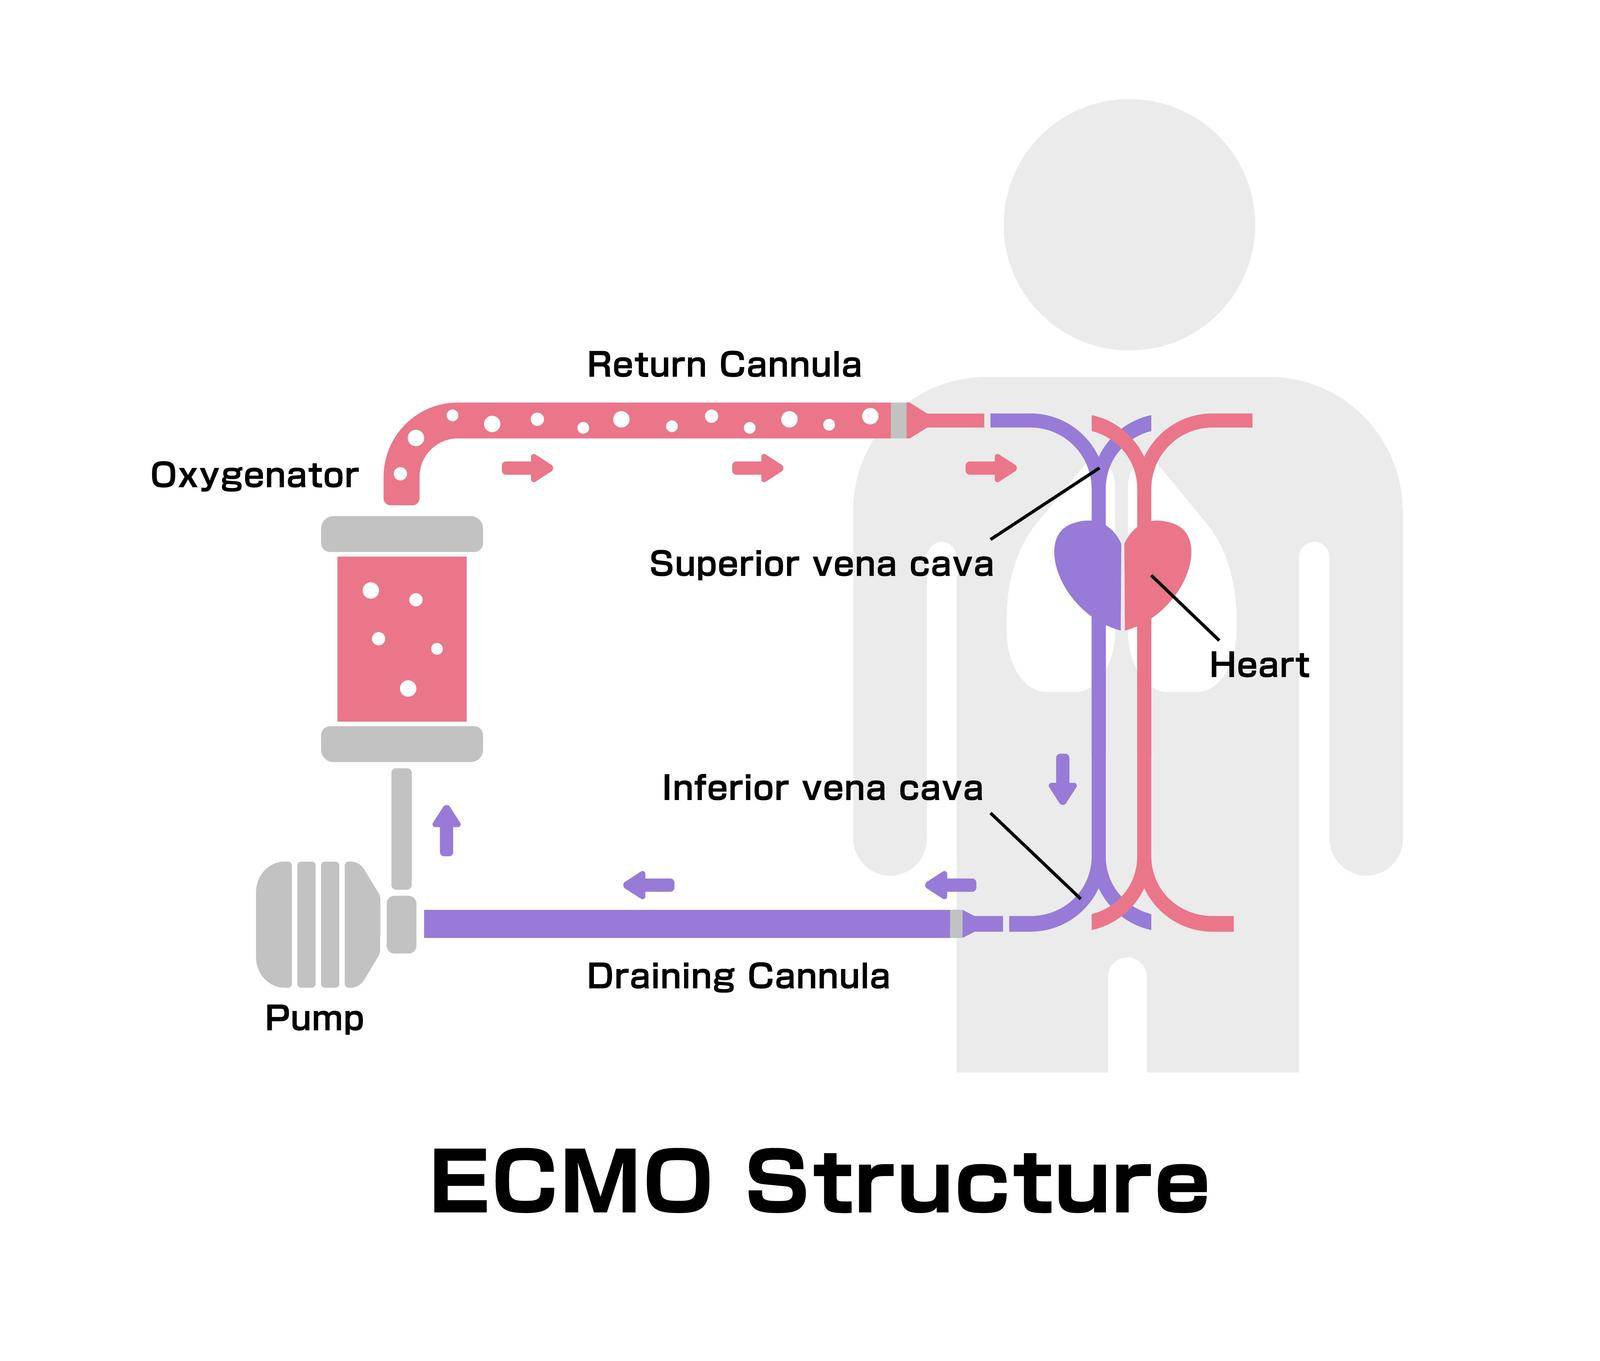 ECMO ( Extracorporeal membrane oxygenation ) structure vector illustration by barks